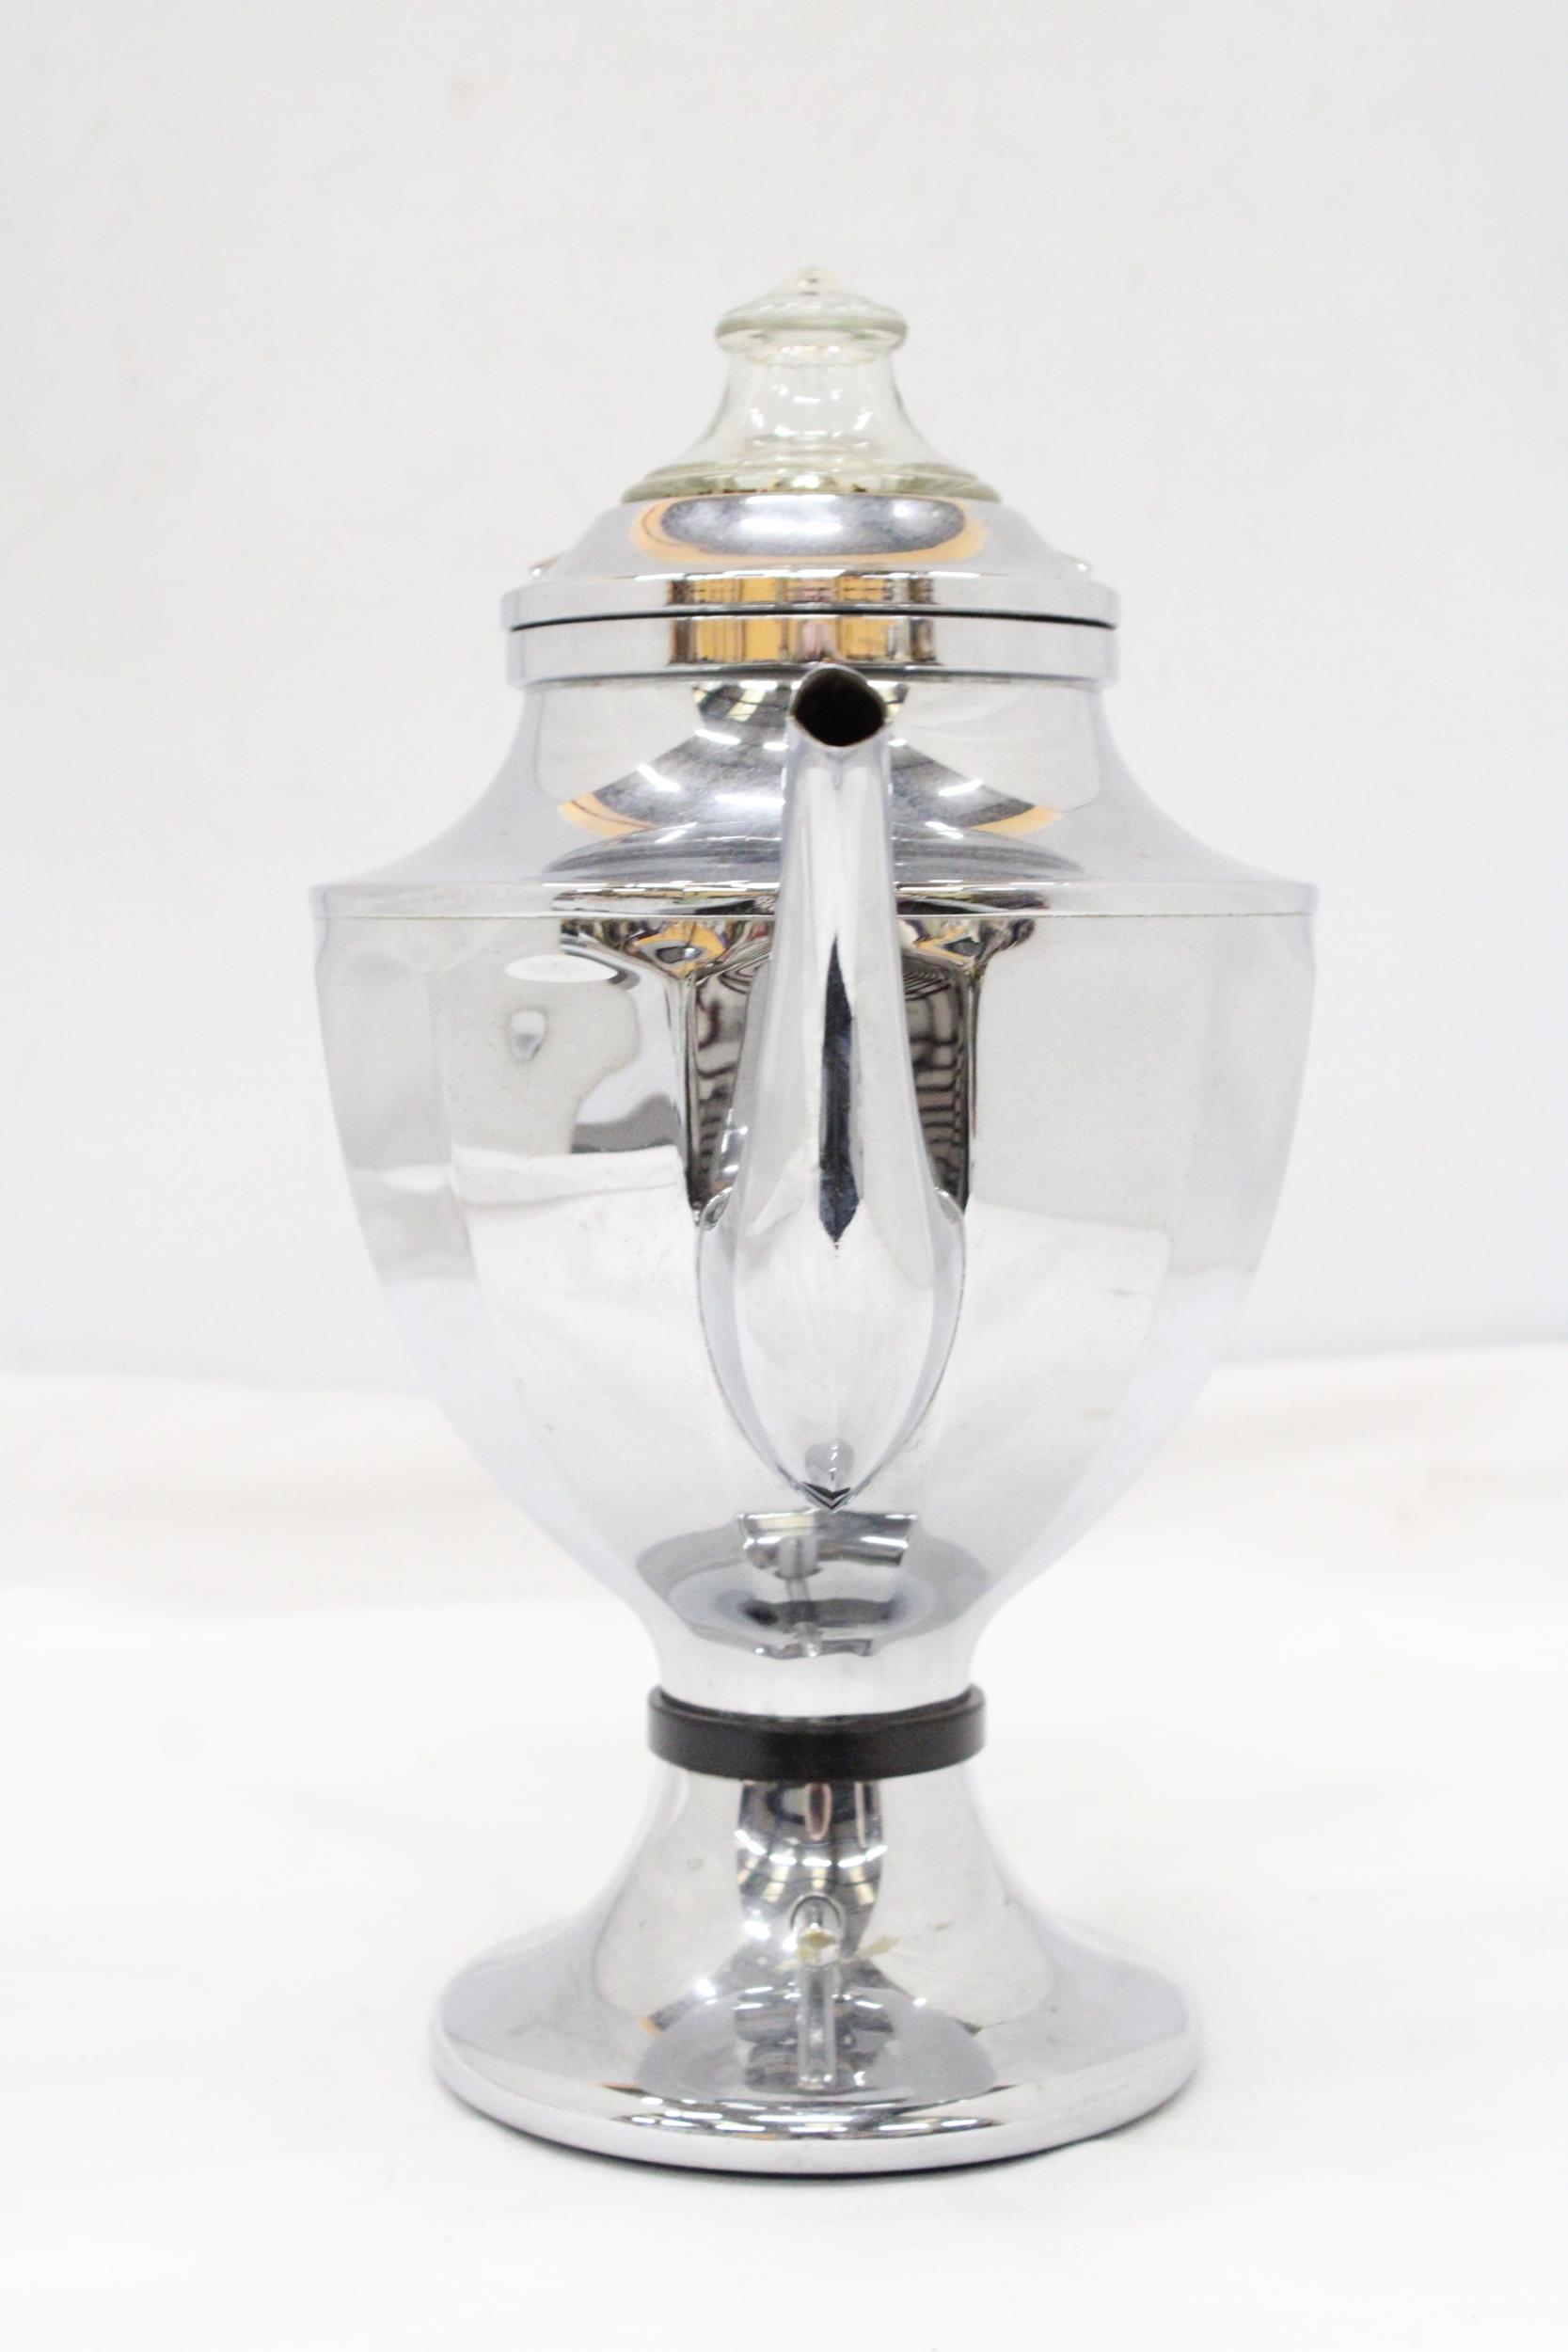 AN ART DECO STYLE, SILVER PLATED COFFEE PERCULATOR - Image 3 of 4